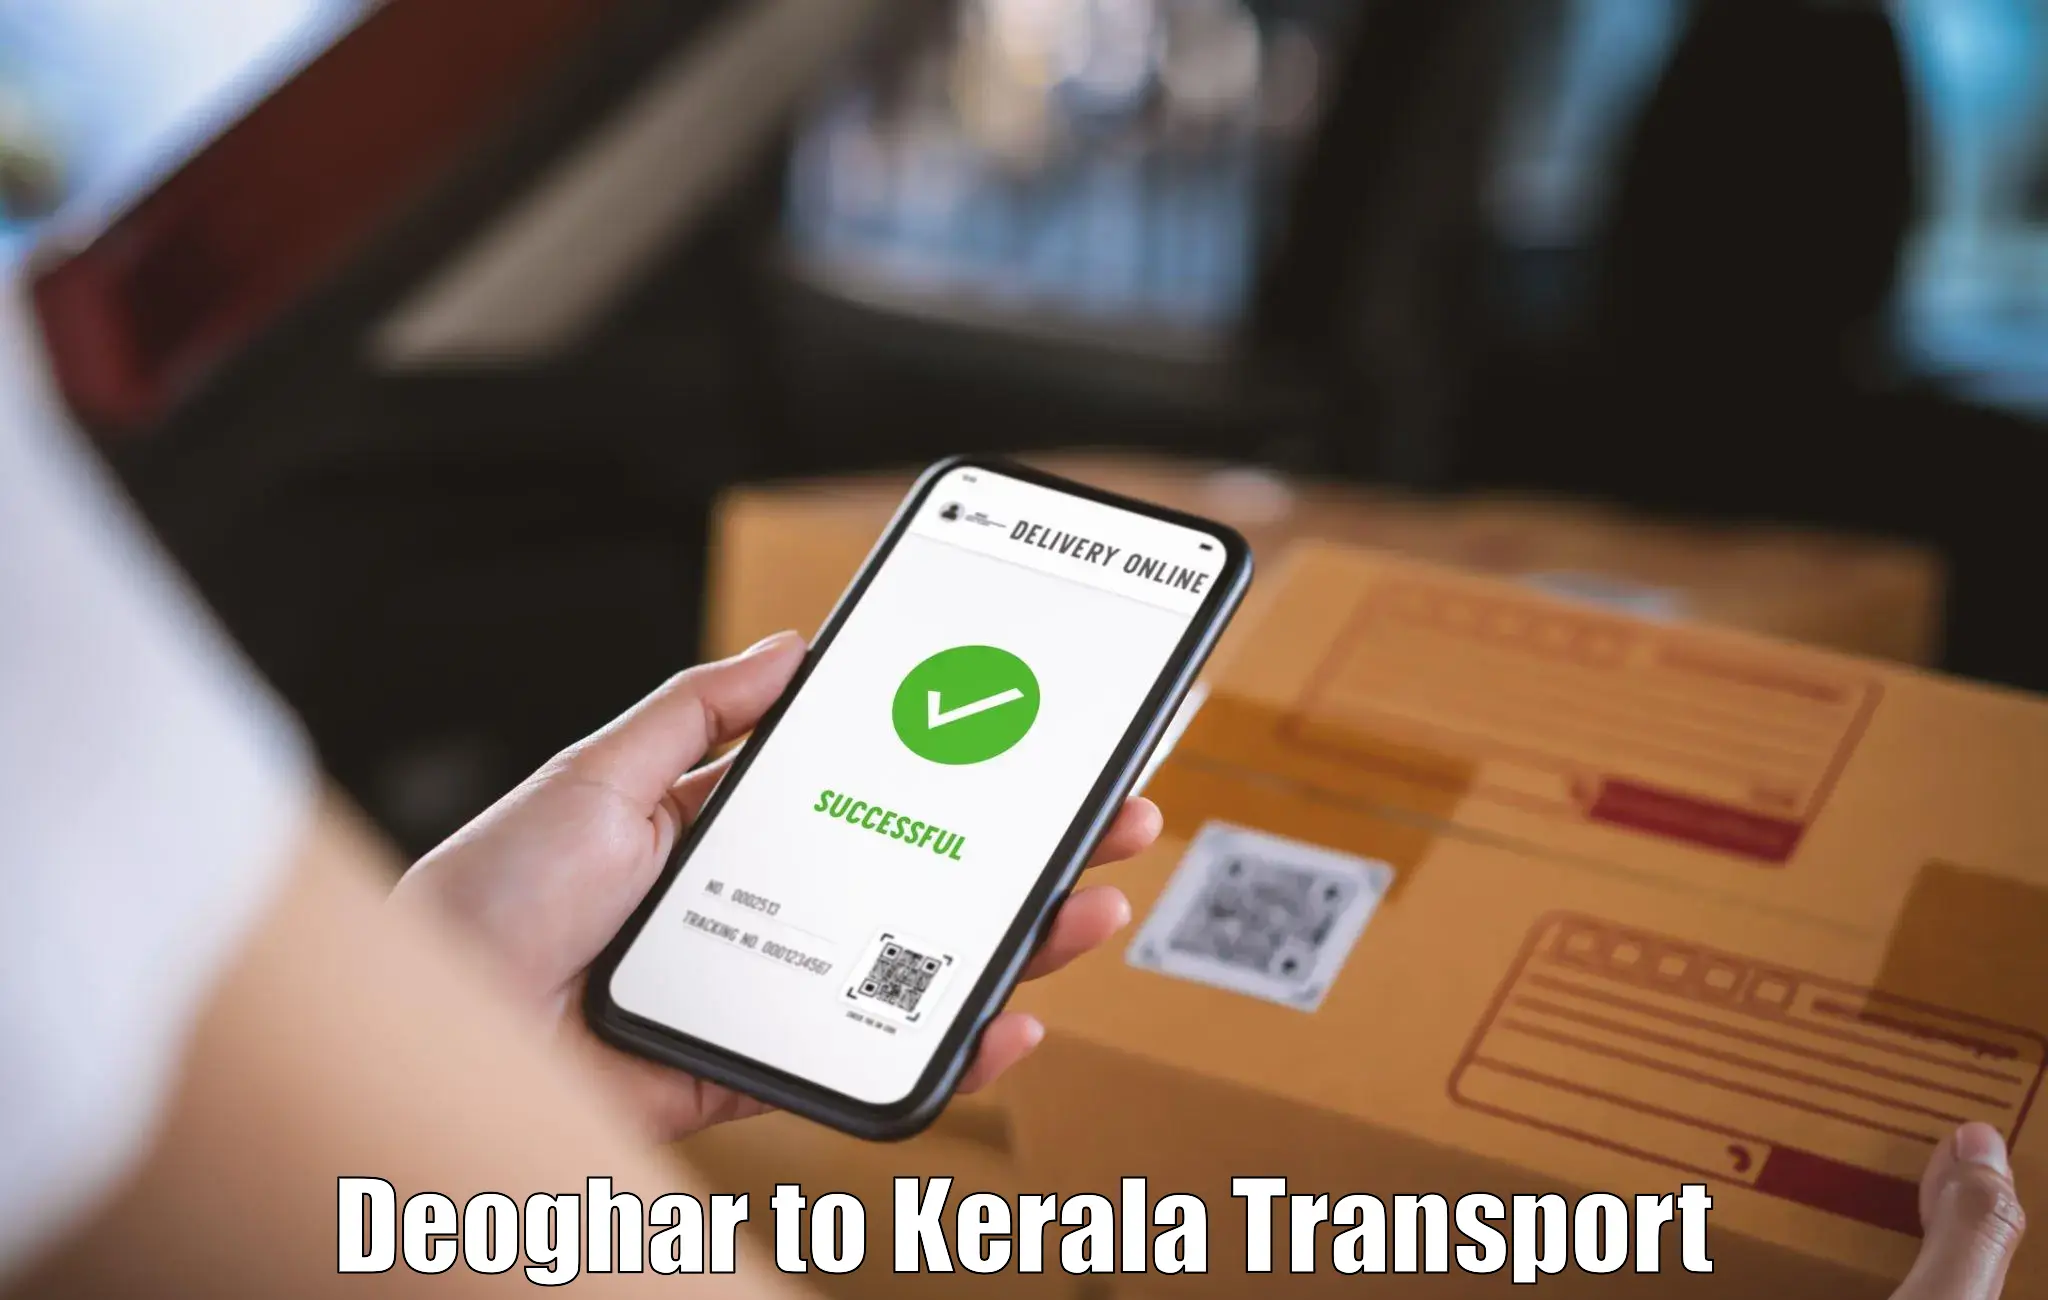 Parcel transport services Deoghar to Nallepilly